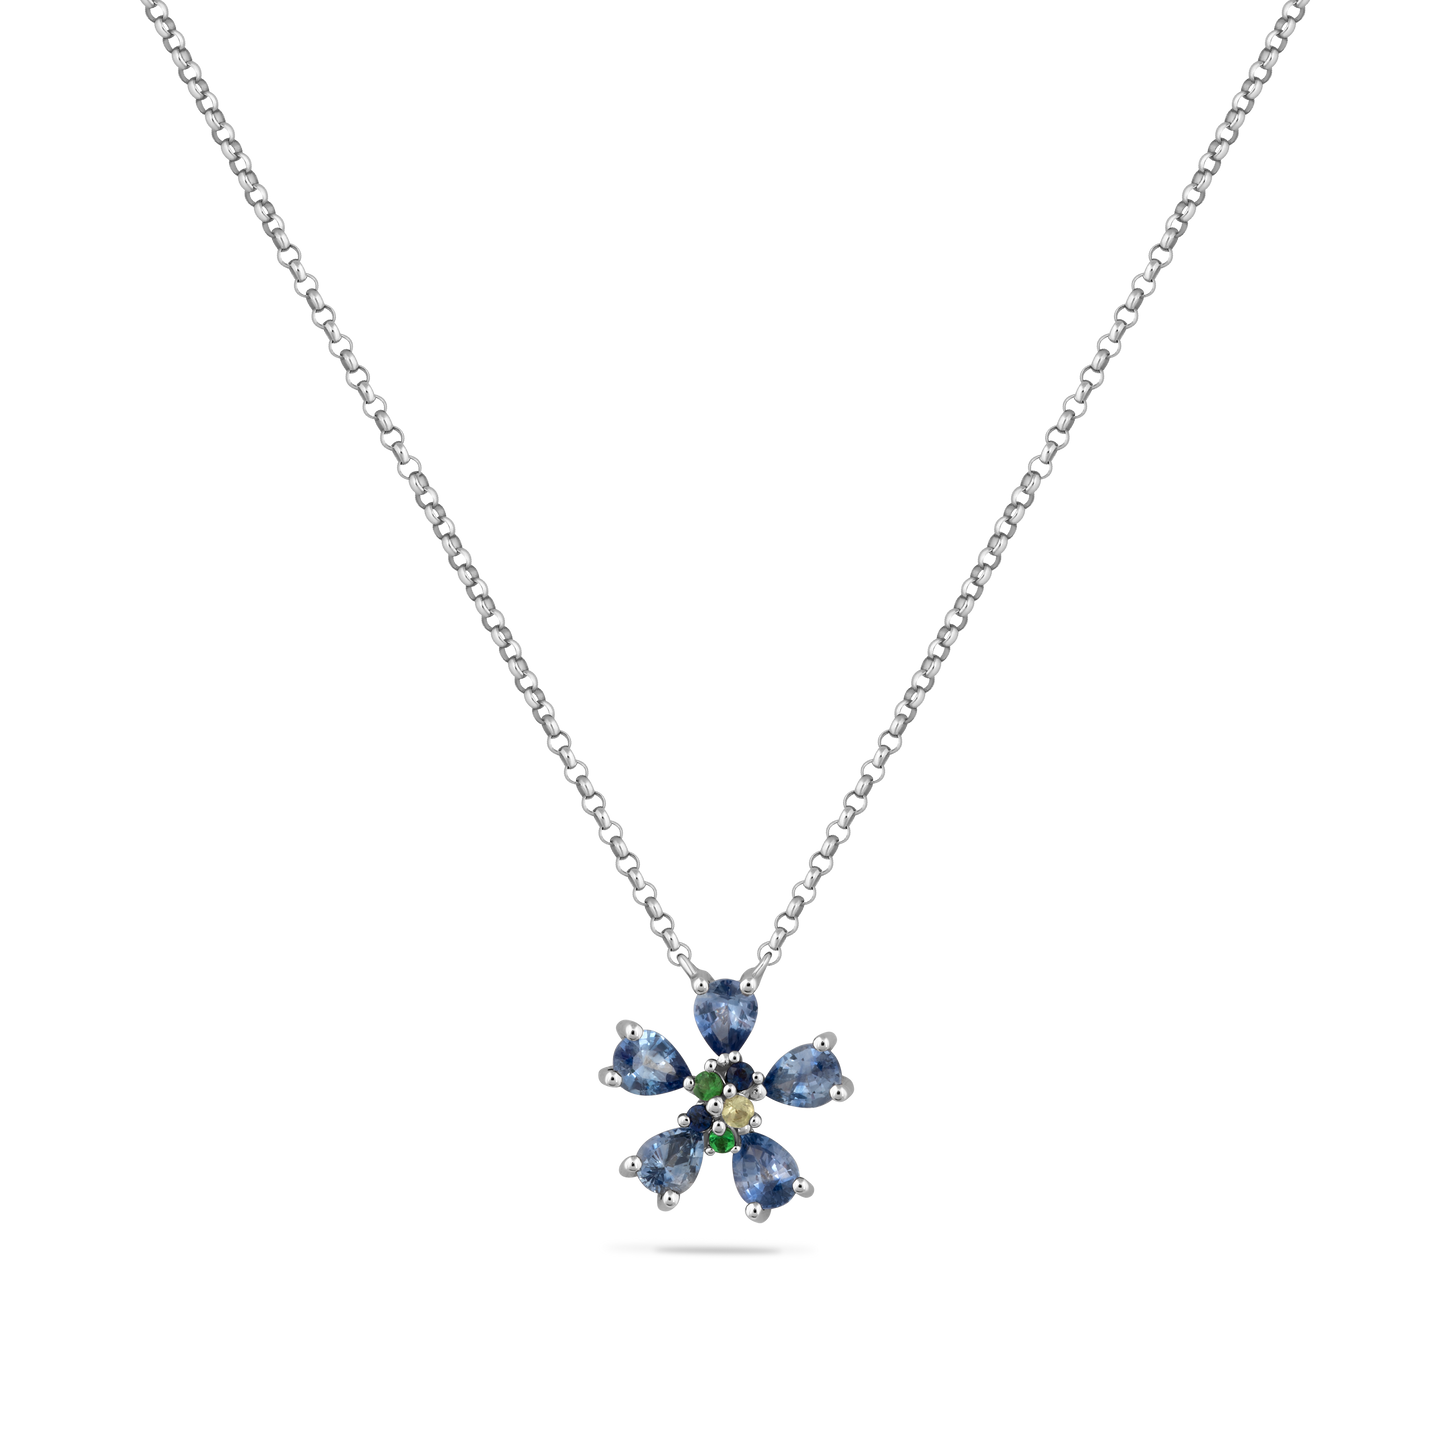 14K FLOWER PENDANT WITH 2 GREEN GARNETS 0.03CT, 5 FANCY BLUE SAPPHIRES 0.93CT ON 18 INCHES CHAIN